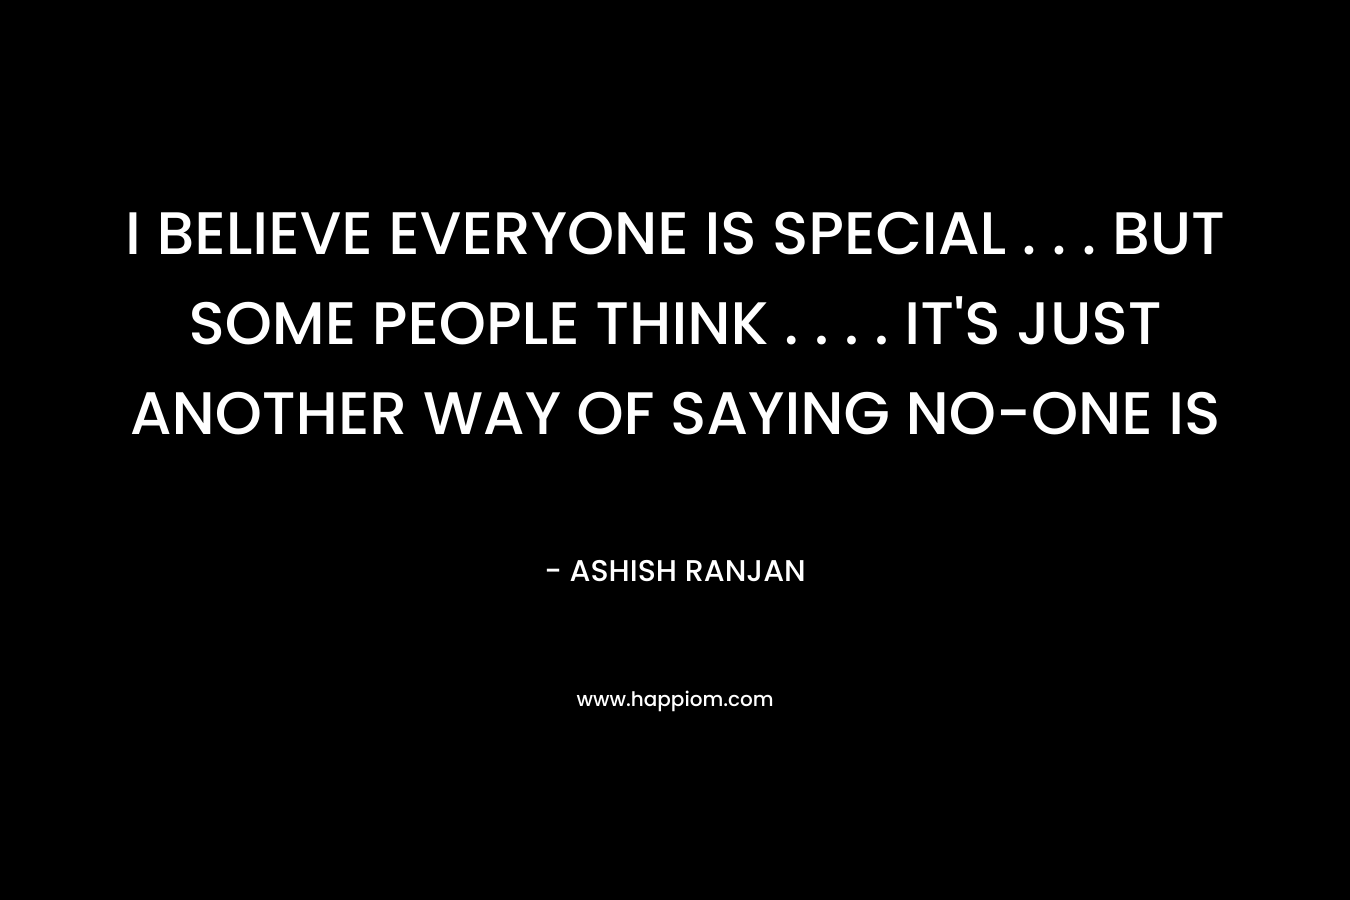 I BELIEVE EVERYONE IS SPECIAL . . . BUT SOME PEOPLE THINK . . . . IT'S JUST ANOTHER WAY OF SAYING NO-ONE IS